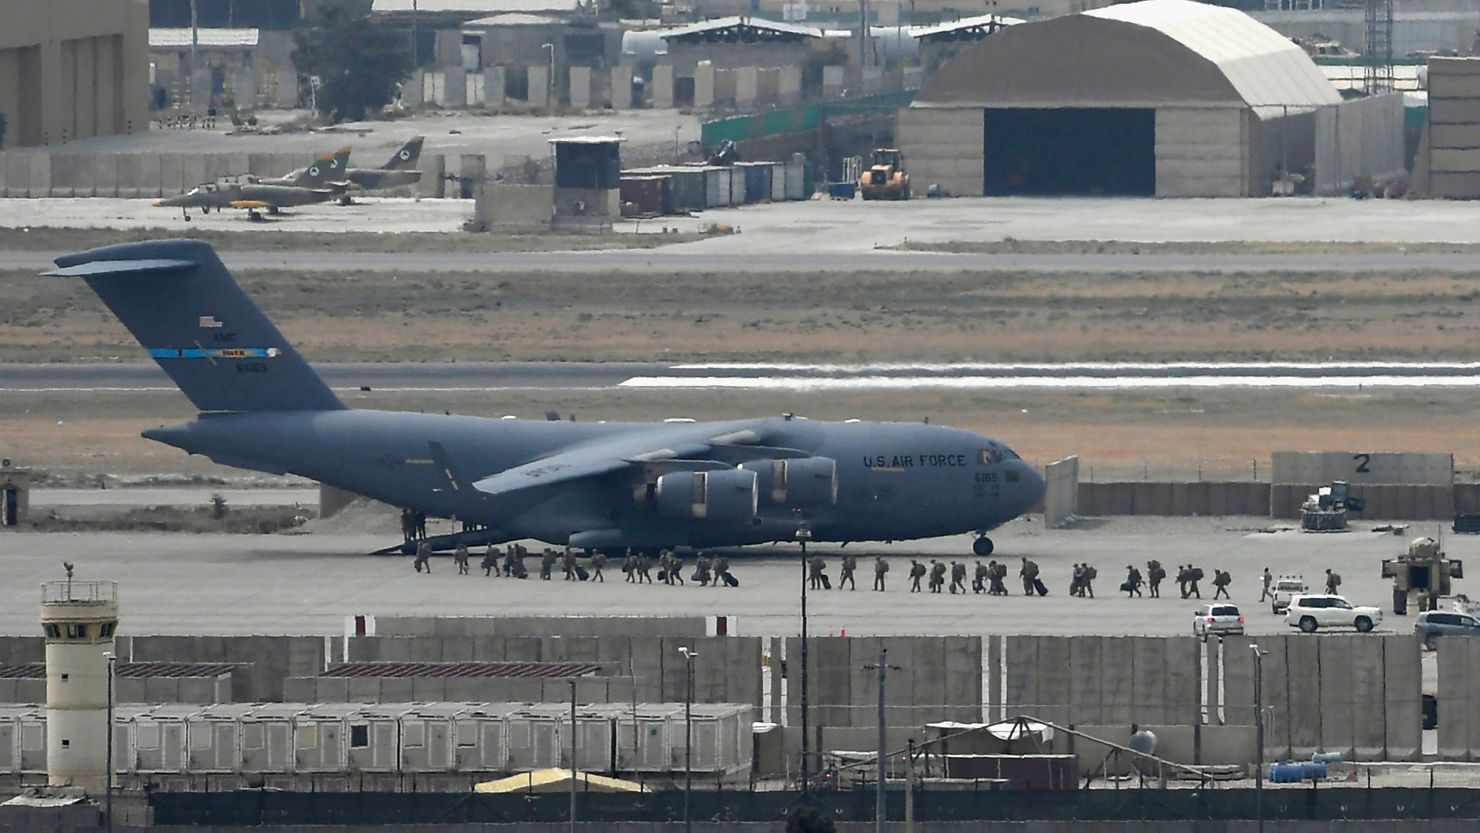 US soldiers board an US Air Force aircraft at the airport in Kabul on August 30, 2021.